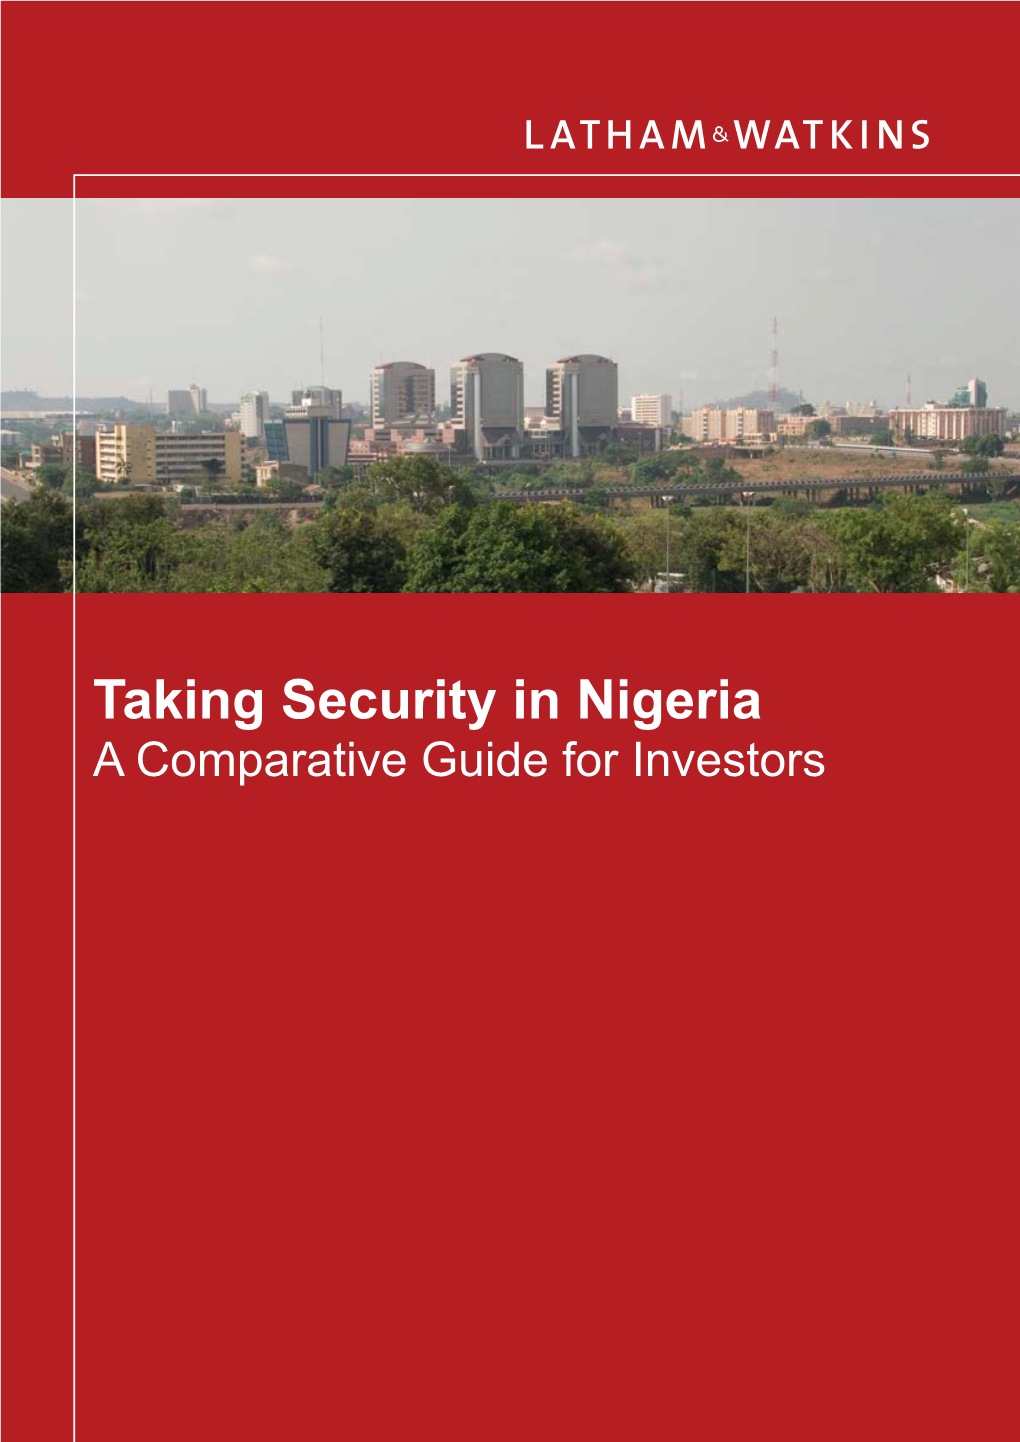 Taking Security in Nigeria a Comparative Guide for Investors ABOUT THIS GUIDE